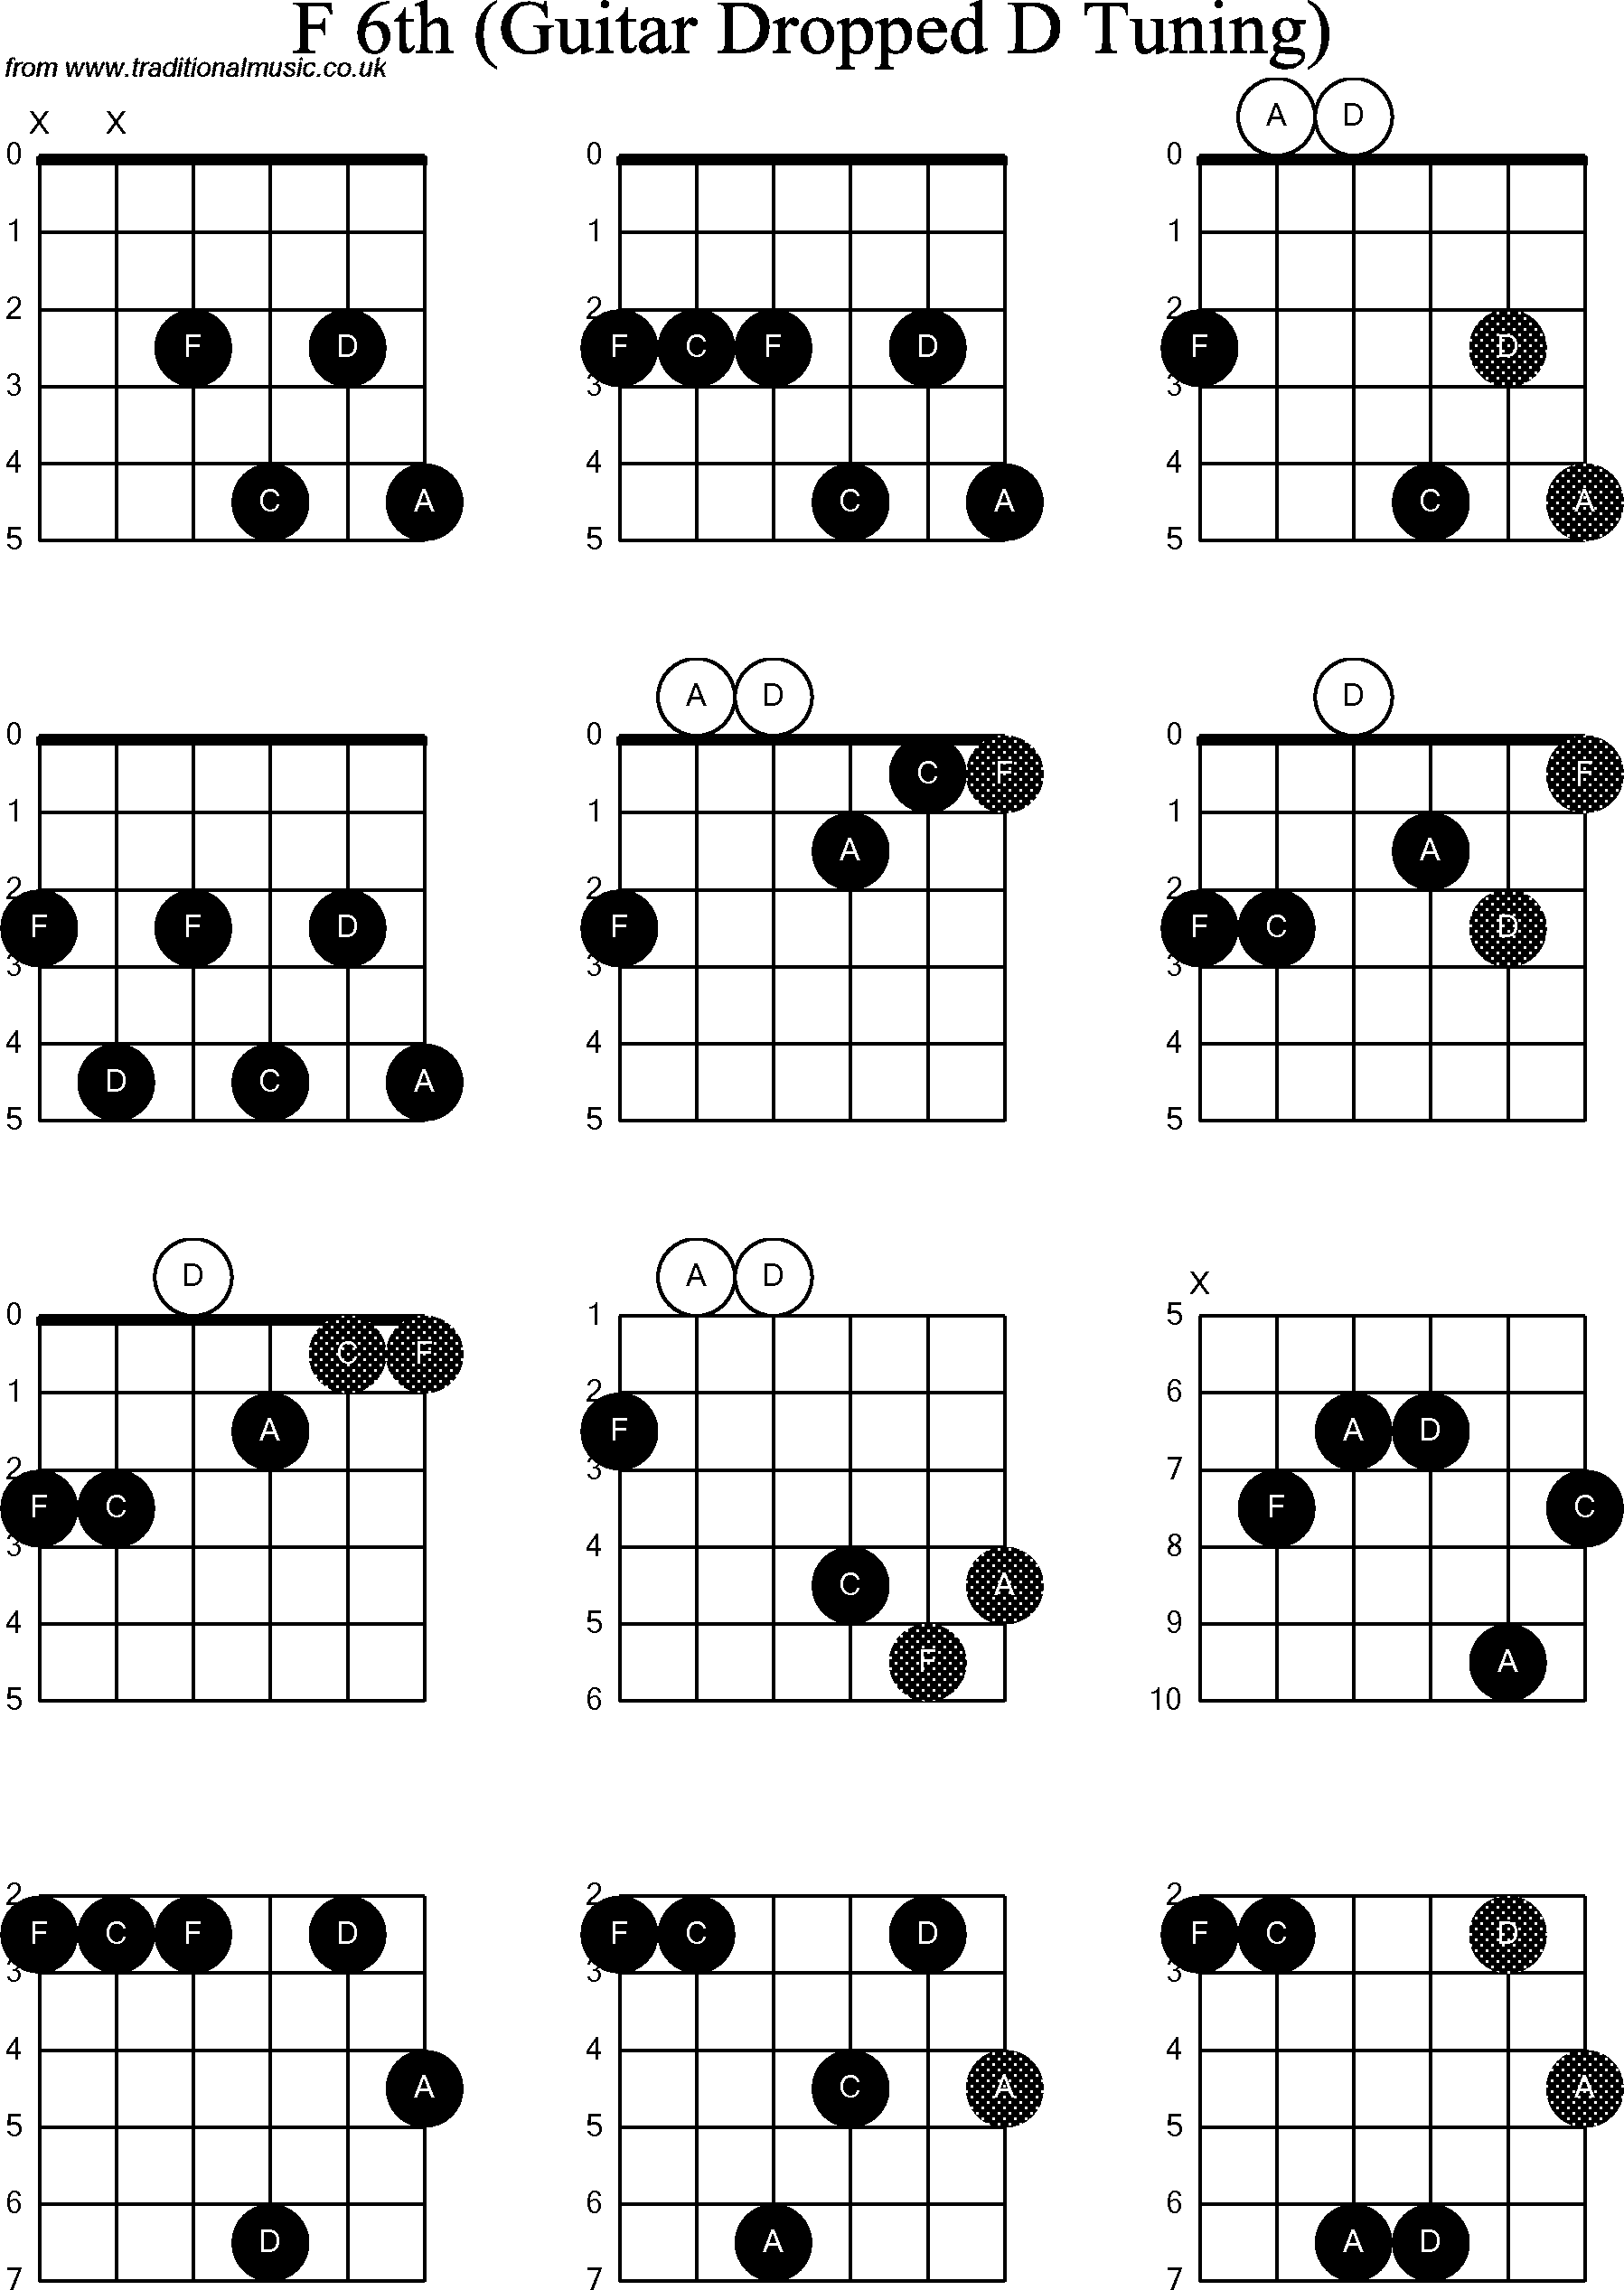 Chord diagrams for Dropped D Guitar(DADGBE), F Sharp